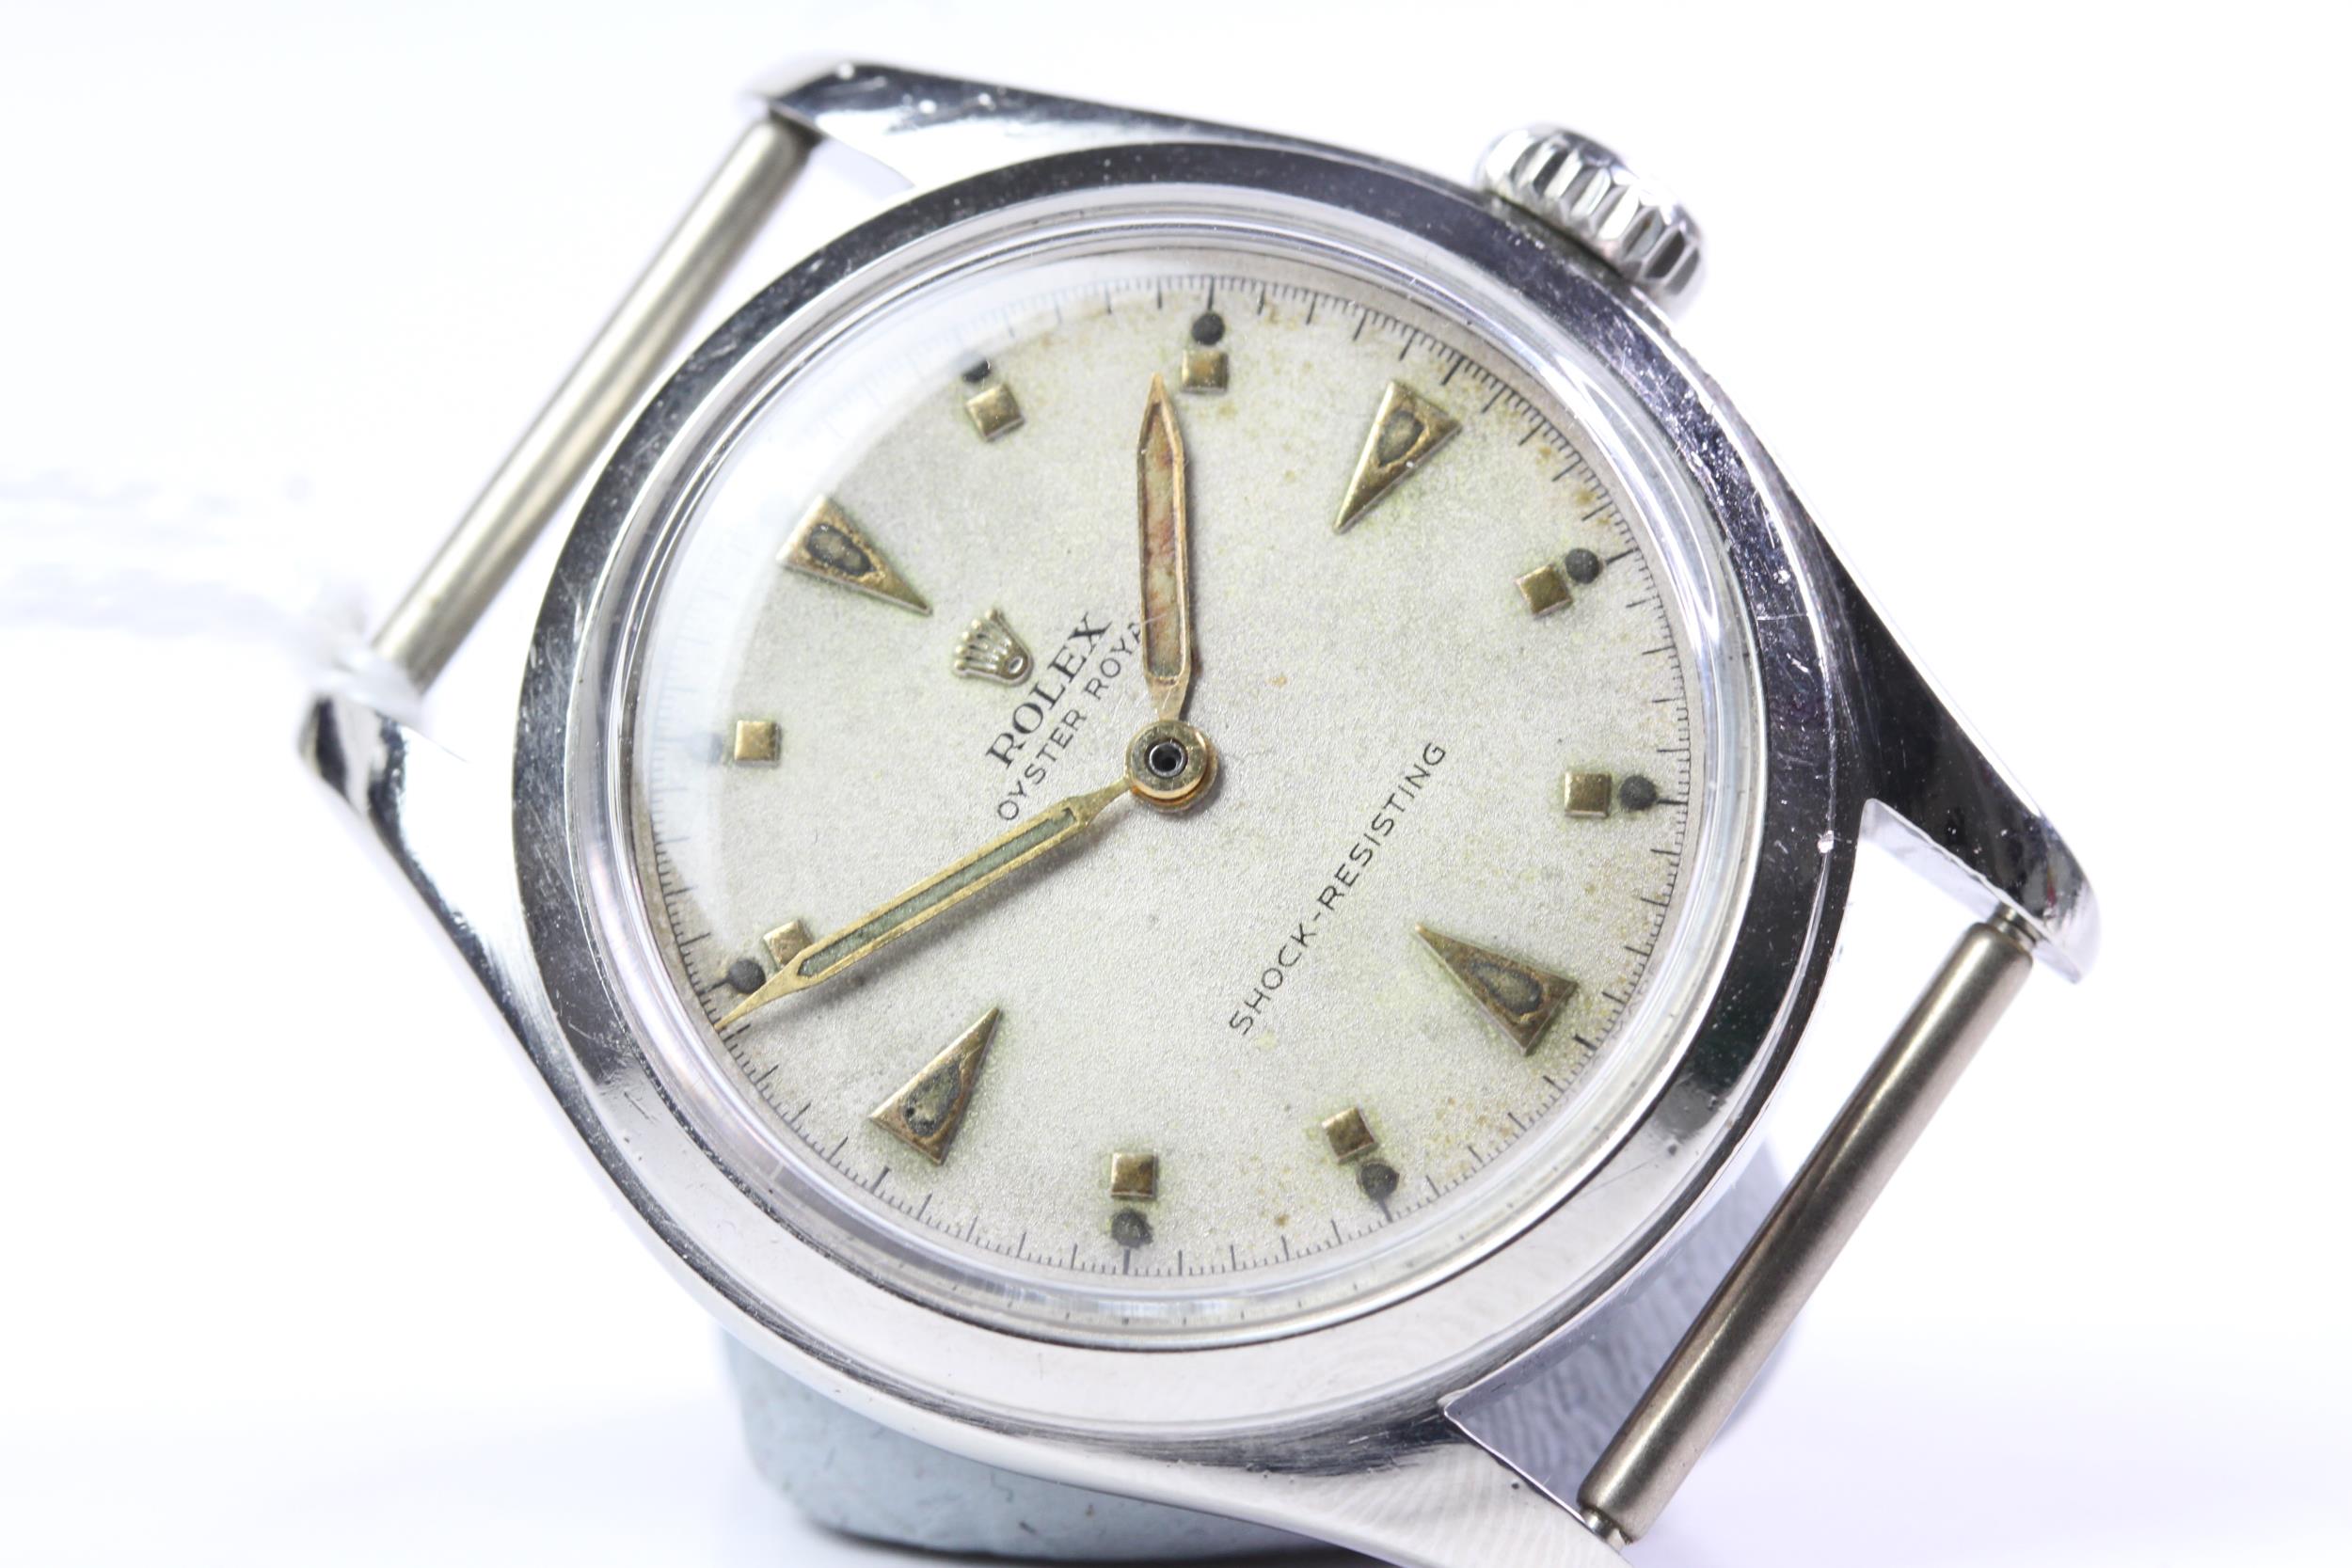 VINTAGE ROLEX OYSTER ROYAL 6144 CIRCA 1962, circular cream dial with baton hour markers, 32mm